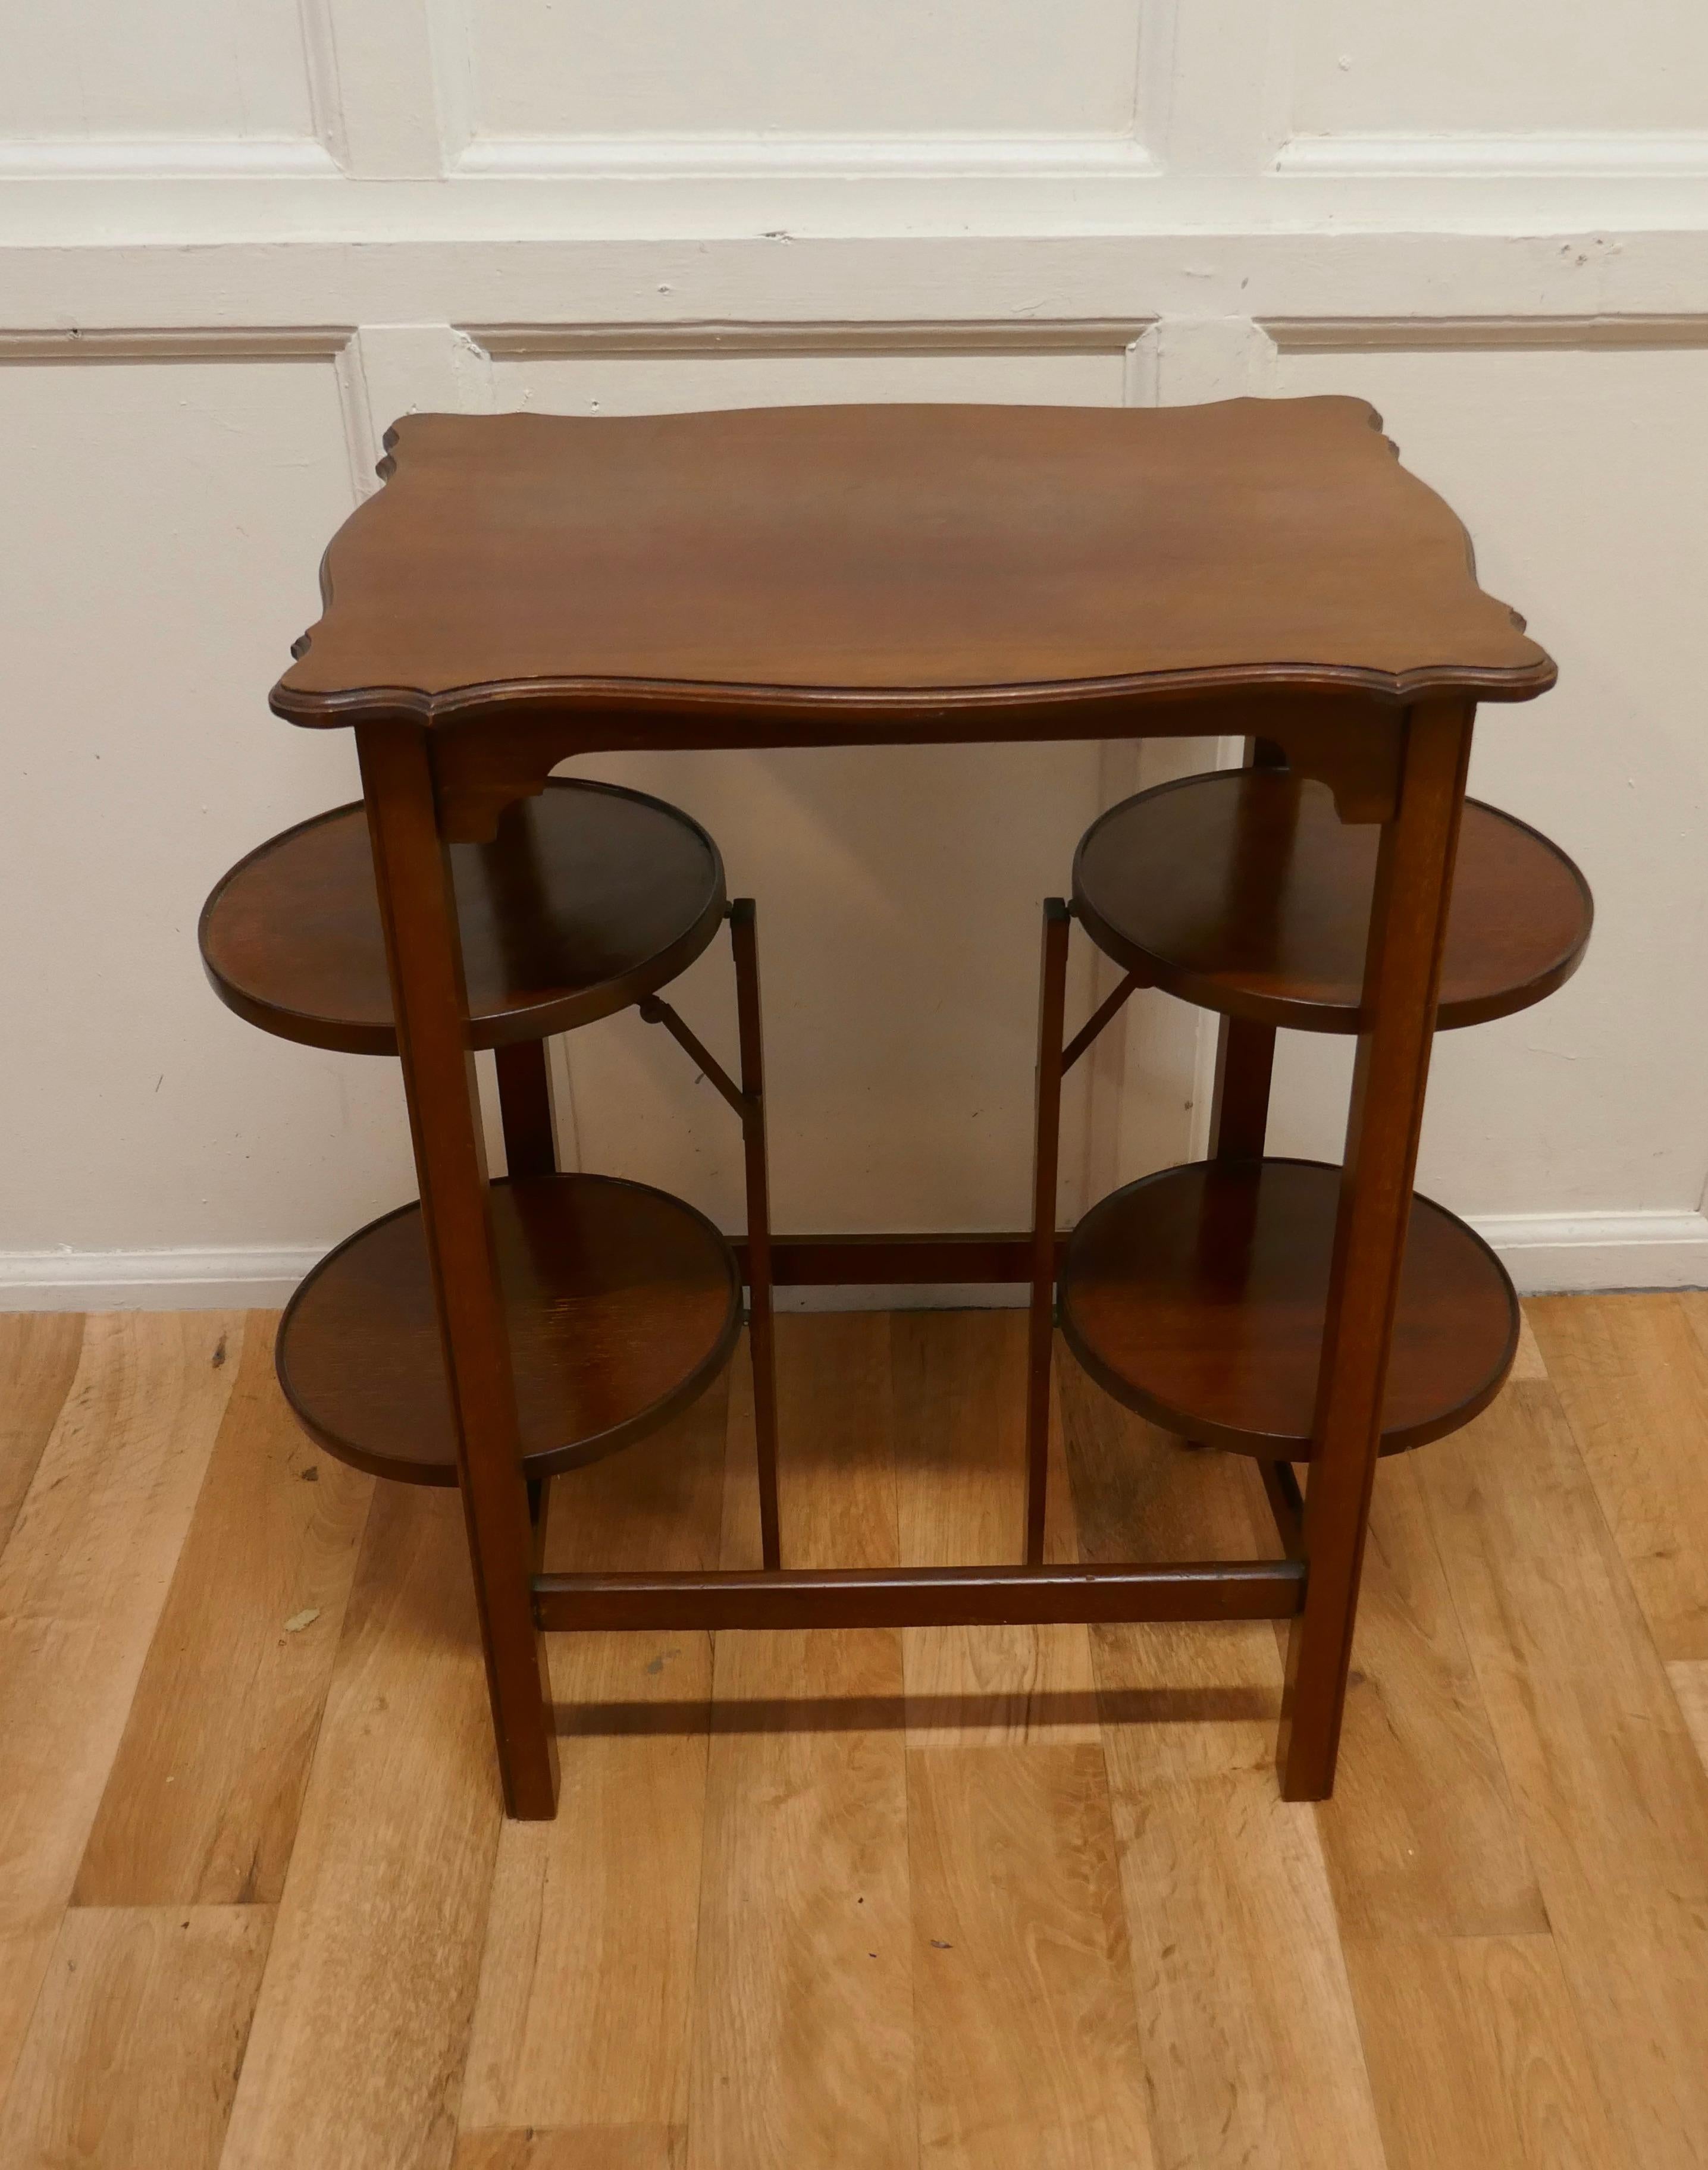 4 Tray Mahogany Table Cake Stand or Dumb Waiter For Sale 4